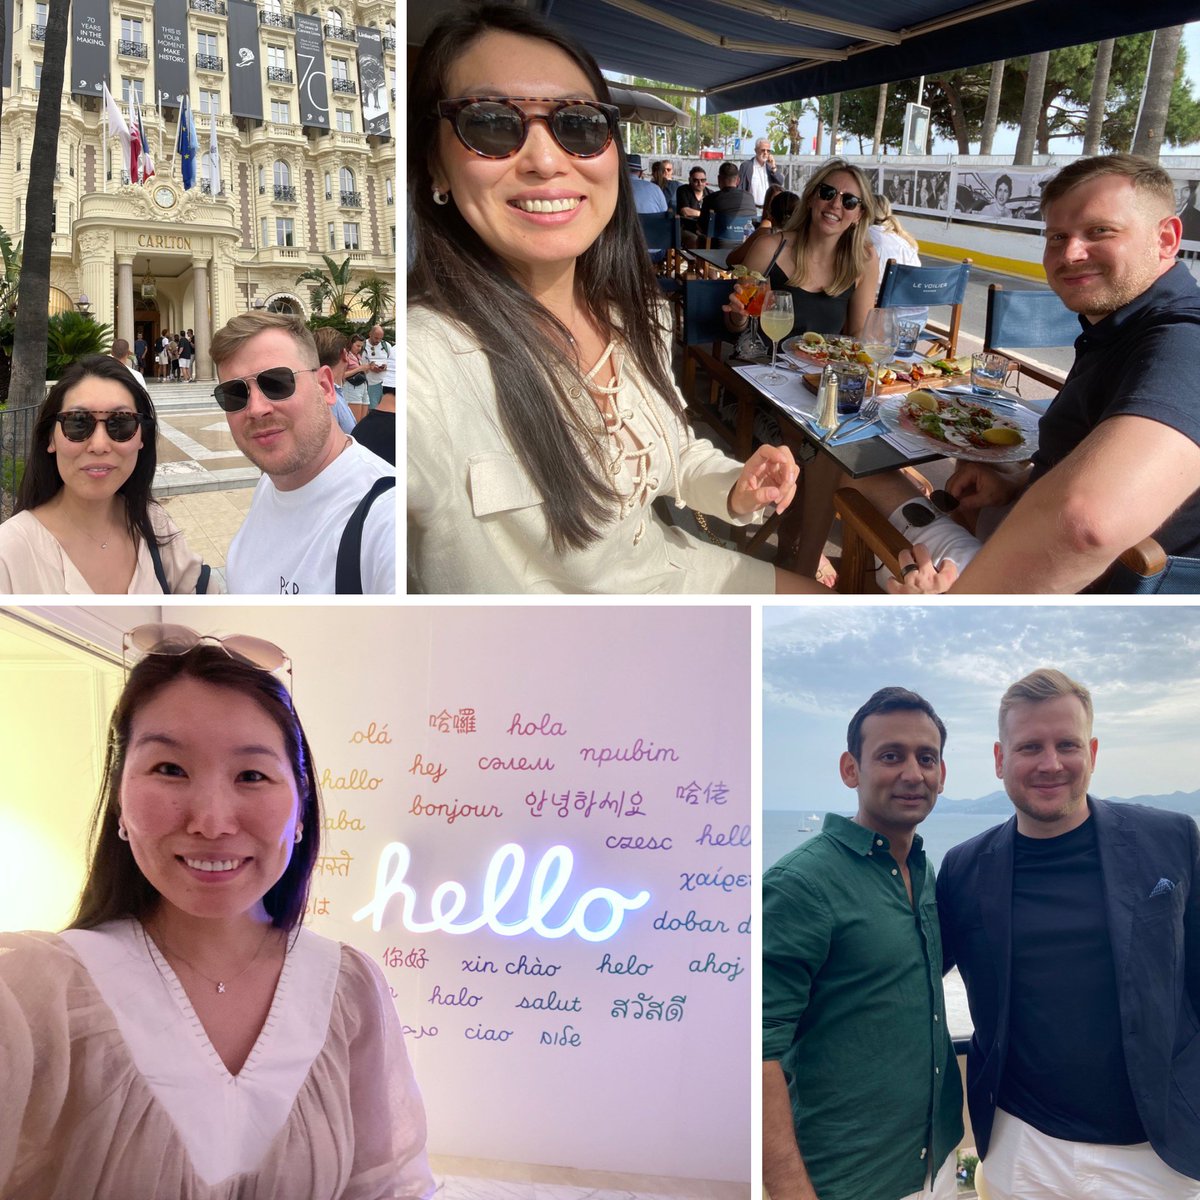 The Cannes Lions International Festival of Creativity 🇫🇷 supercharged our CEO Max Kamenkov and CRO Ayuna Baranova! Shoutout to all our clients & partners we met there!

#CannesLions2023 #appgrowth #appmarketing #mobilemarketing #marketing #mobileapps